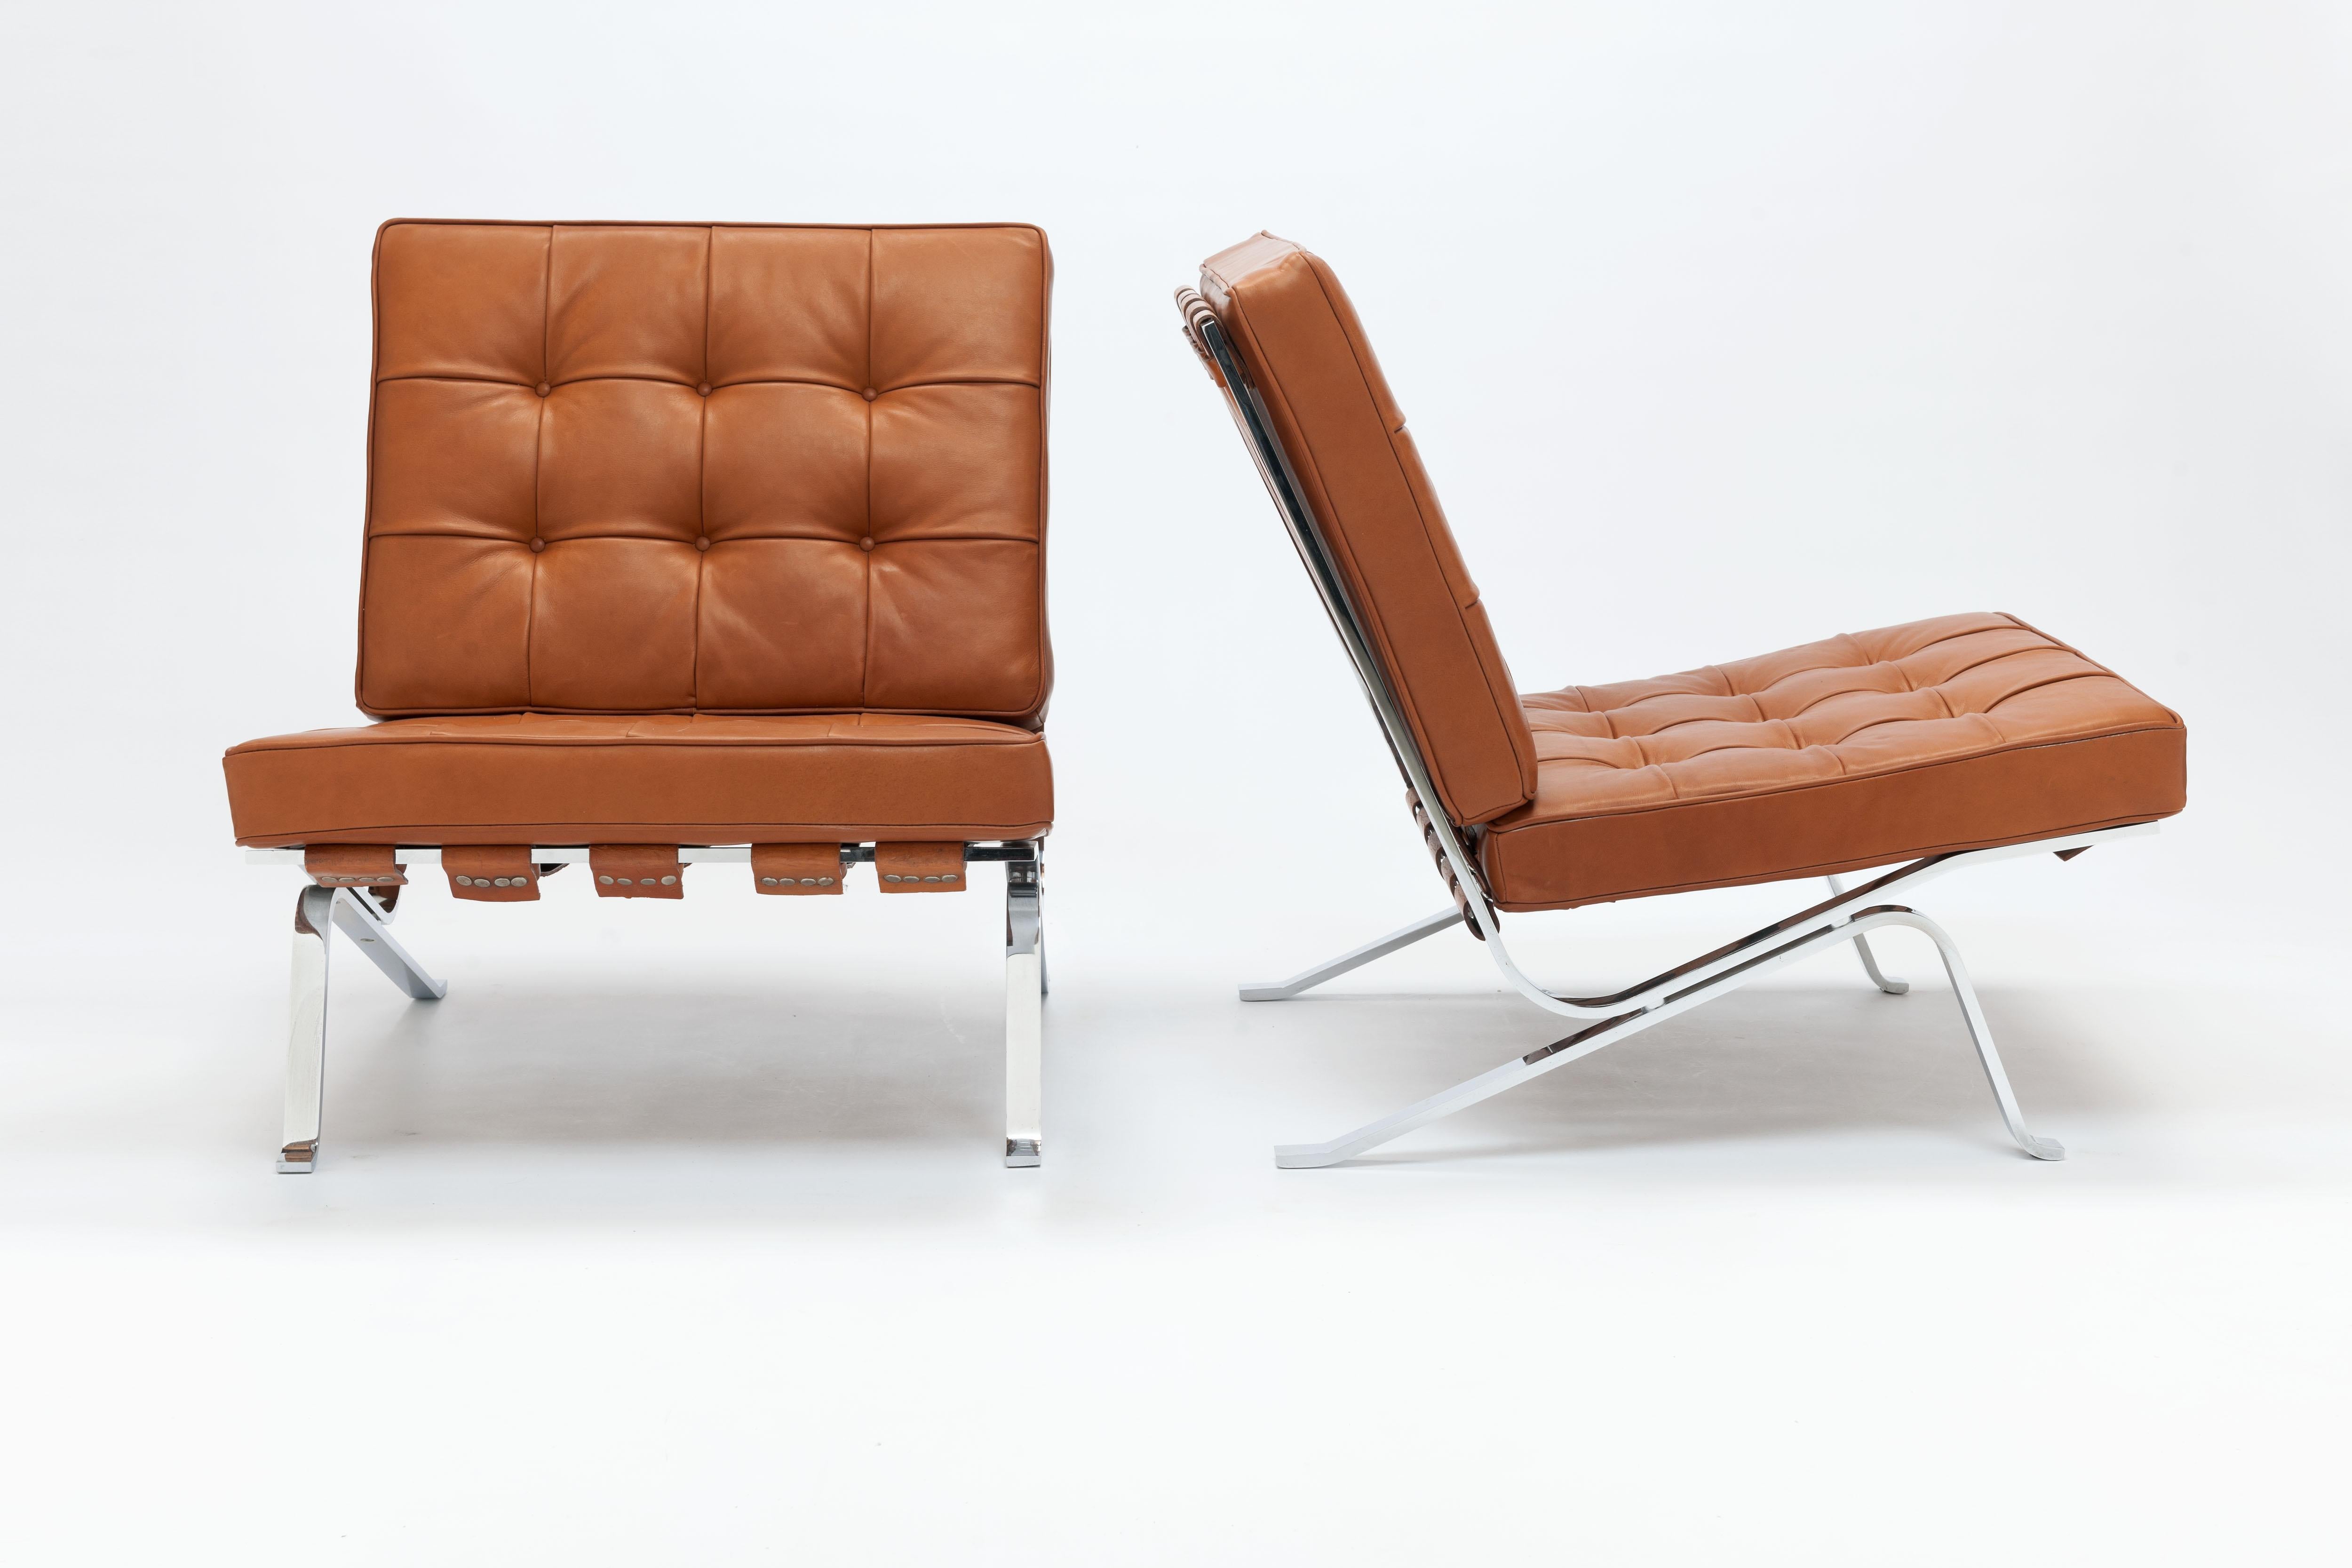 Lounge chair model RH301 by renown Swiss architect Robert Haussmann from 1954. This design is also known as 'Hommage a Mies van der Rohe' because the chair was designed as a tribute to his idol Mies van der Rohe. 
This chair dates from the first